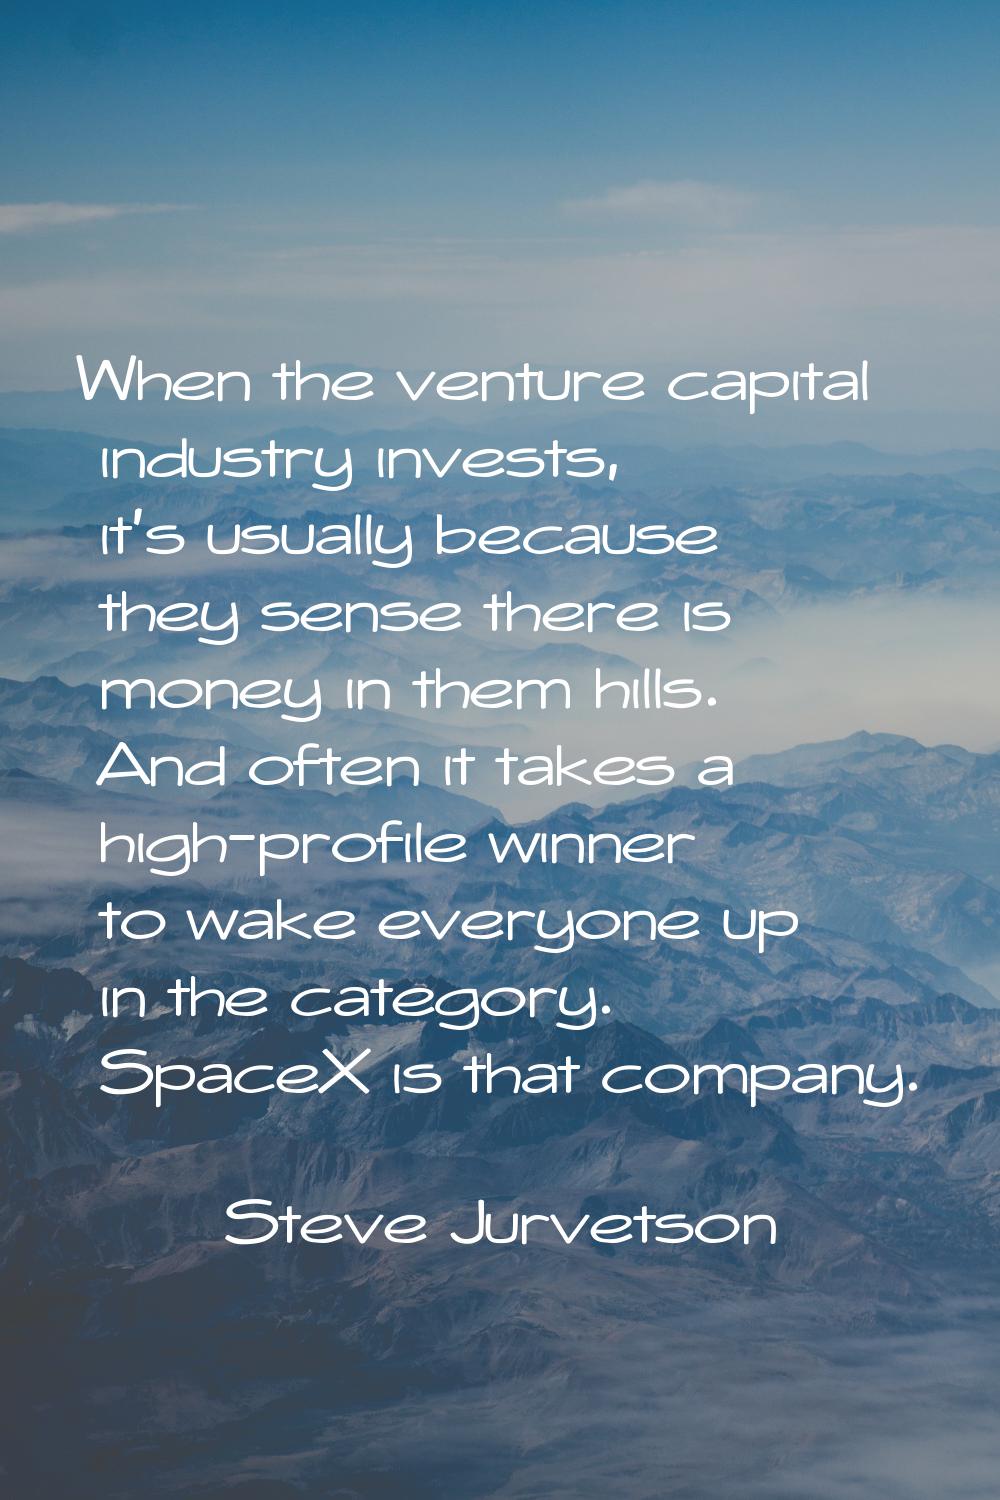 When the venture capital industry invests, it's usually because they sense there is money in them h